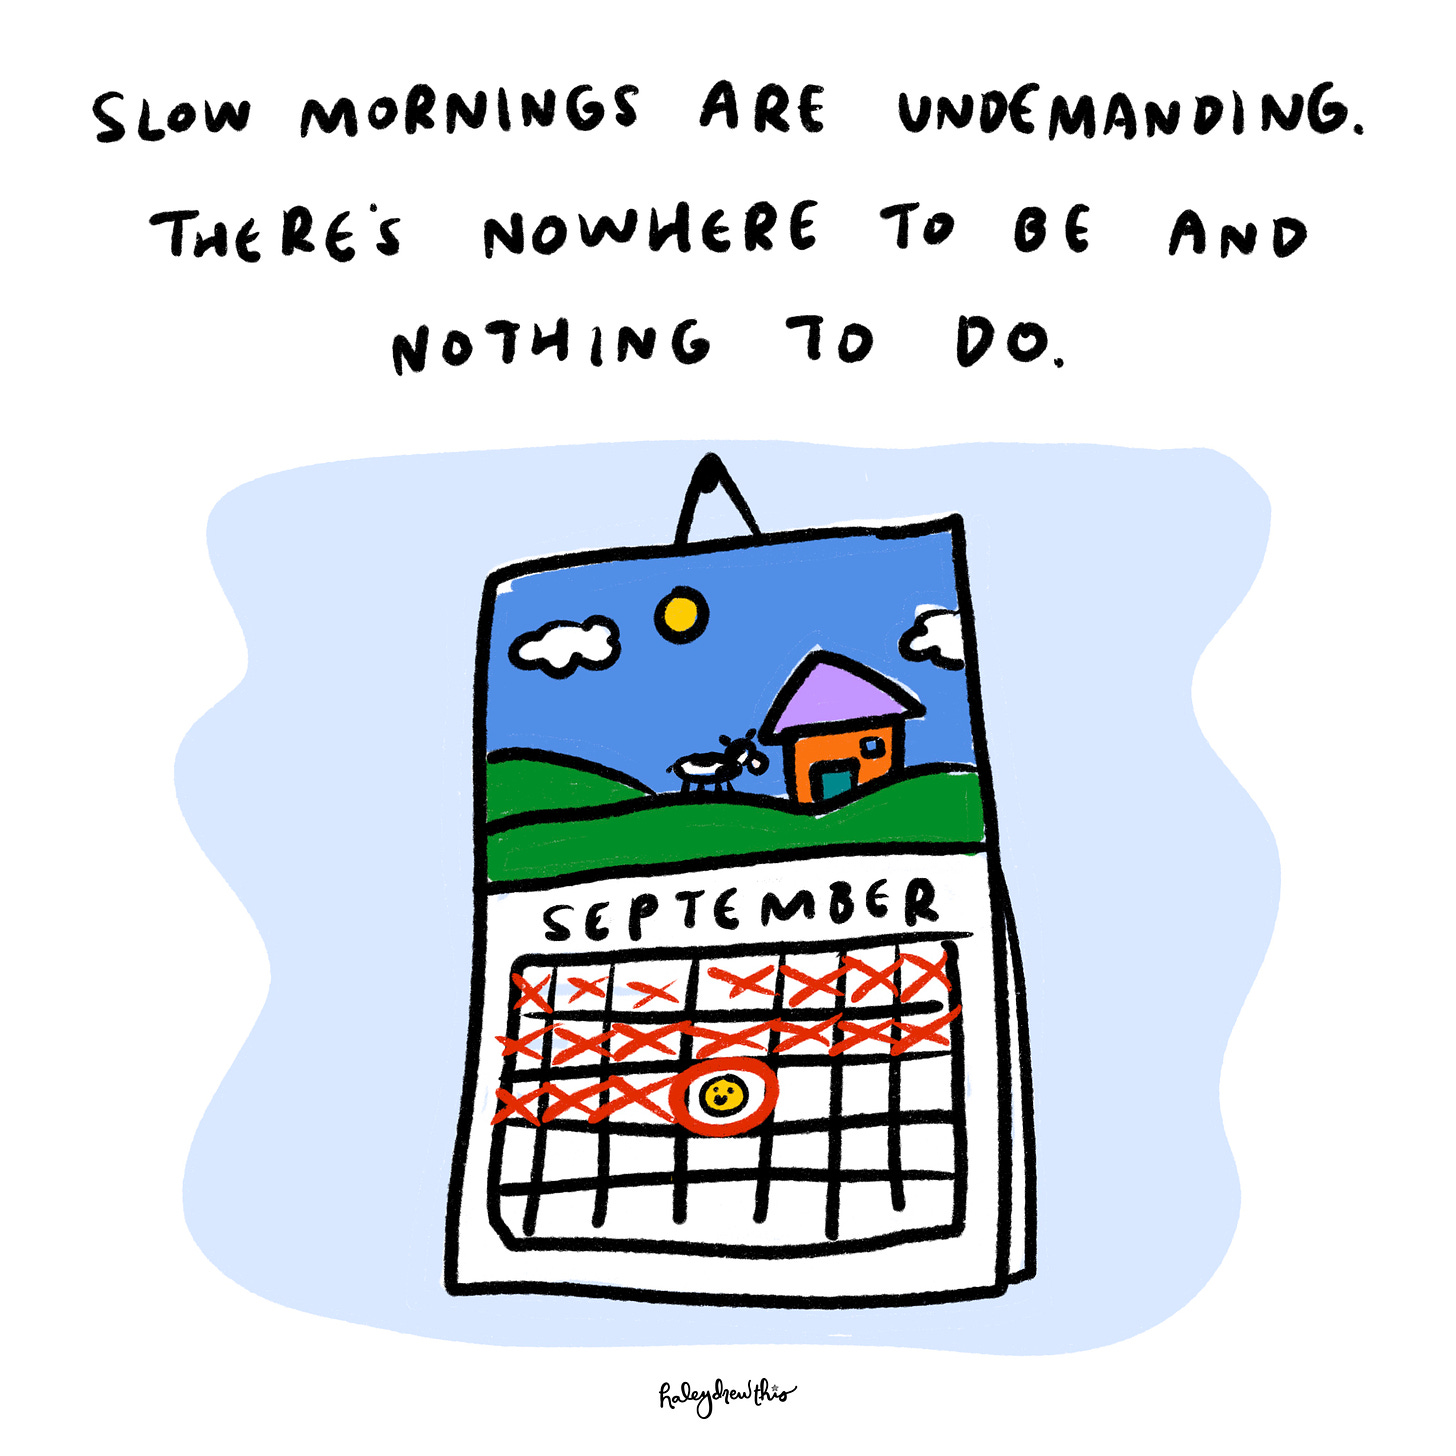 text reads: Slow mornings are undemanding. There’s nowhere to be and nothing to do.  Above image of a calendar